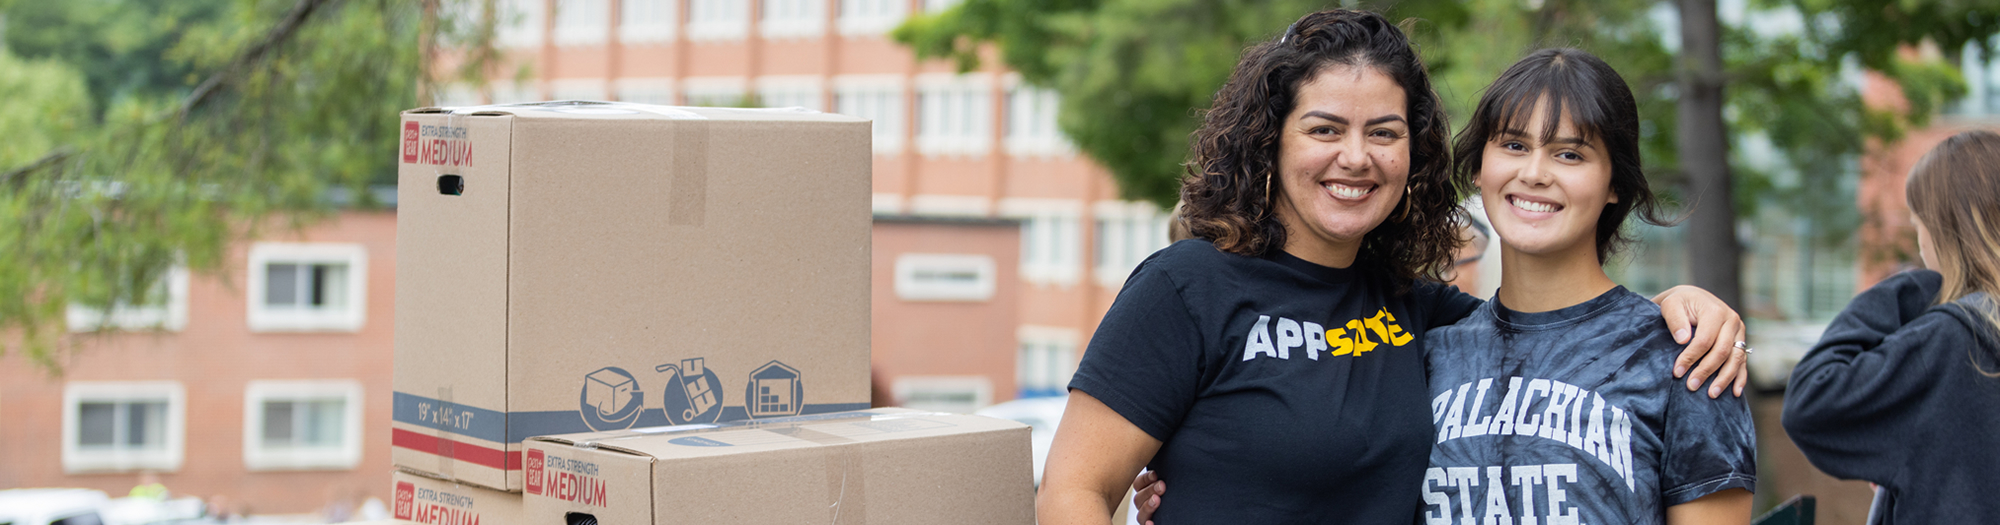 Smiling mother and daughter embrace during move-in day